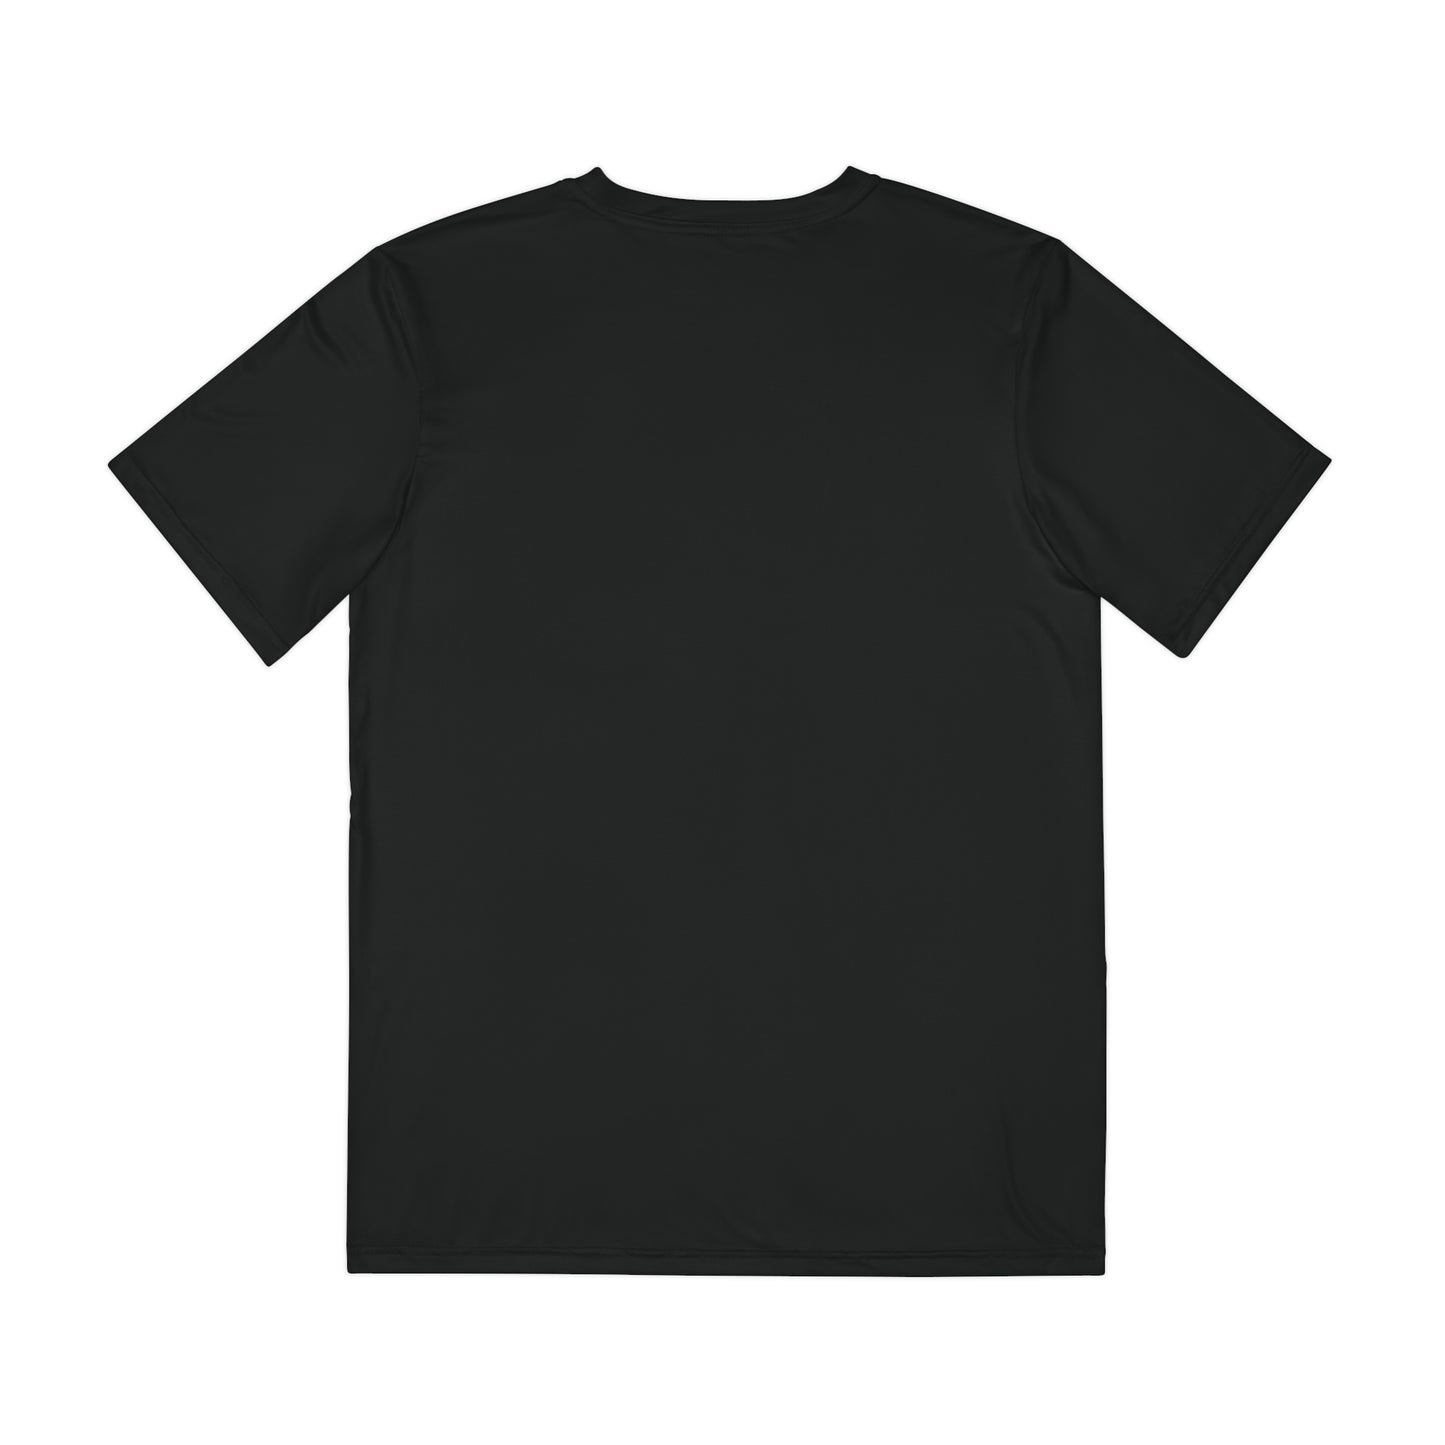 4Give 2B 4Given Men's Polyester Tee